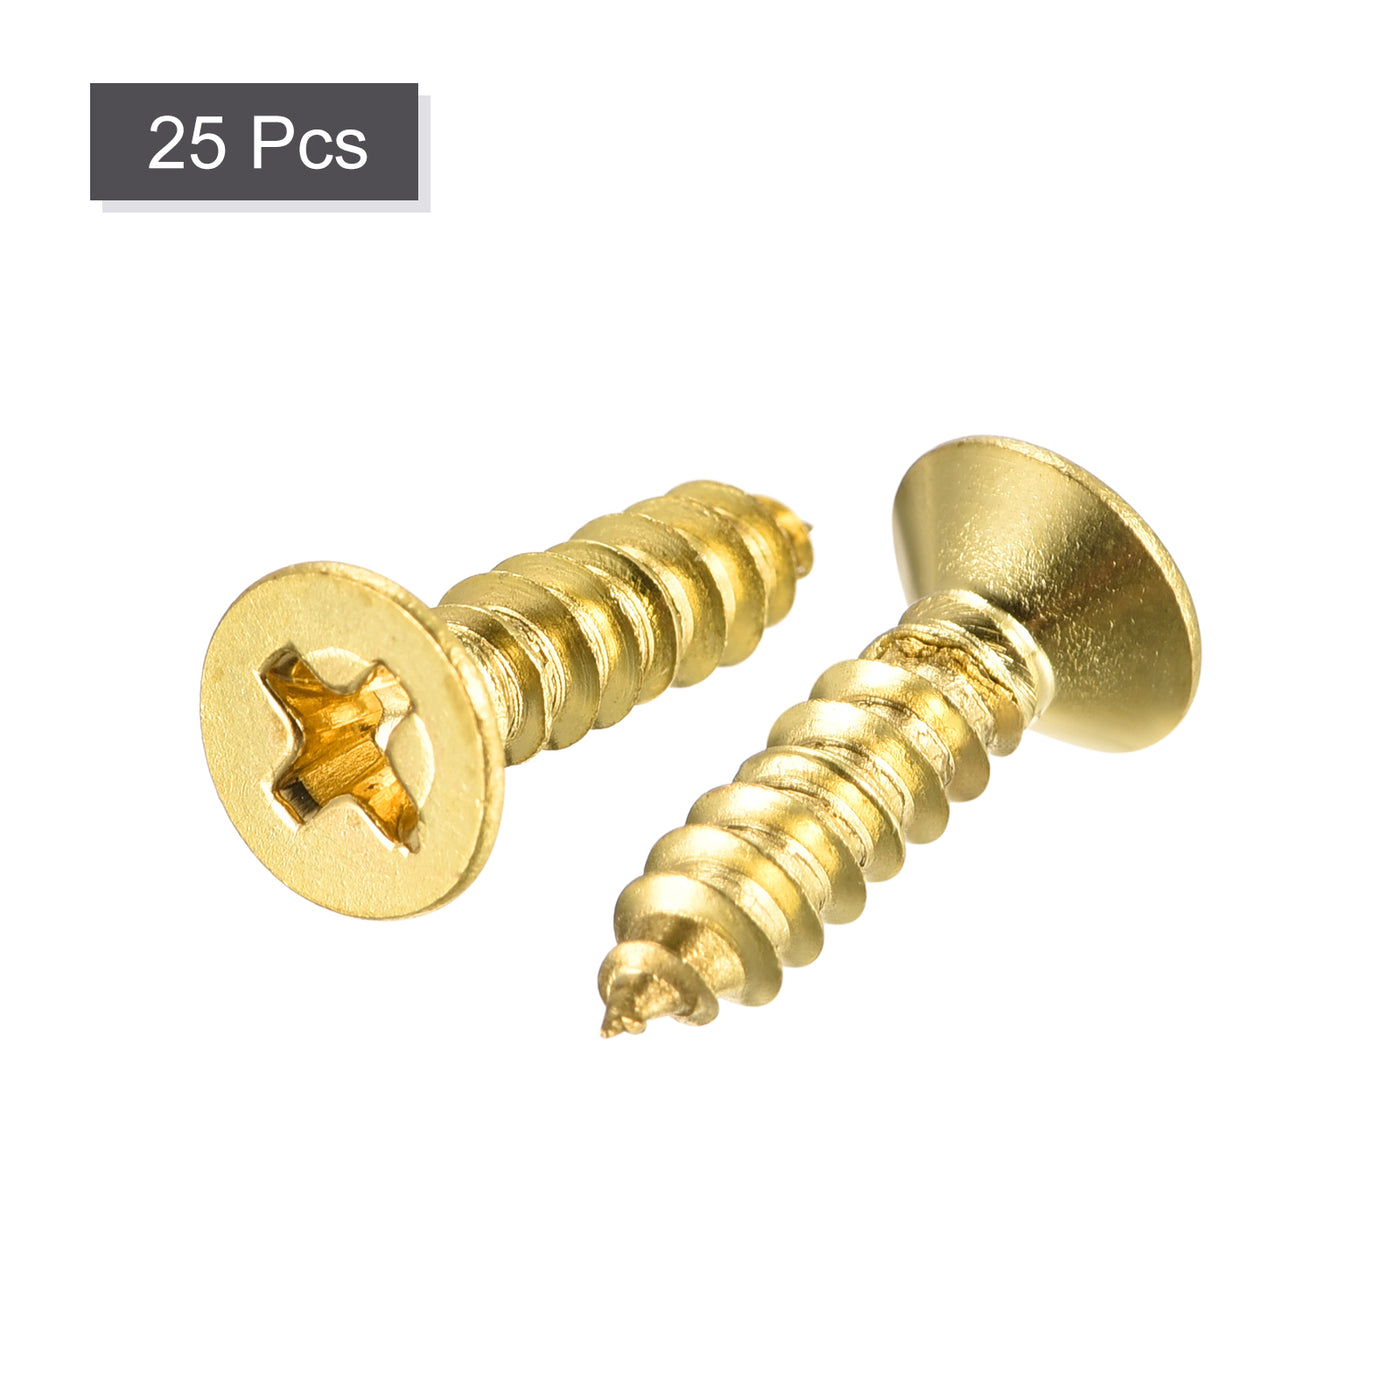 uxcell Uxcell Brass Wood Screws, M4x16mm Phillips Flat Head Self Tapping Connector for Door, Cabinet, Wooden Furniture 25Pcs